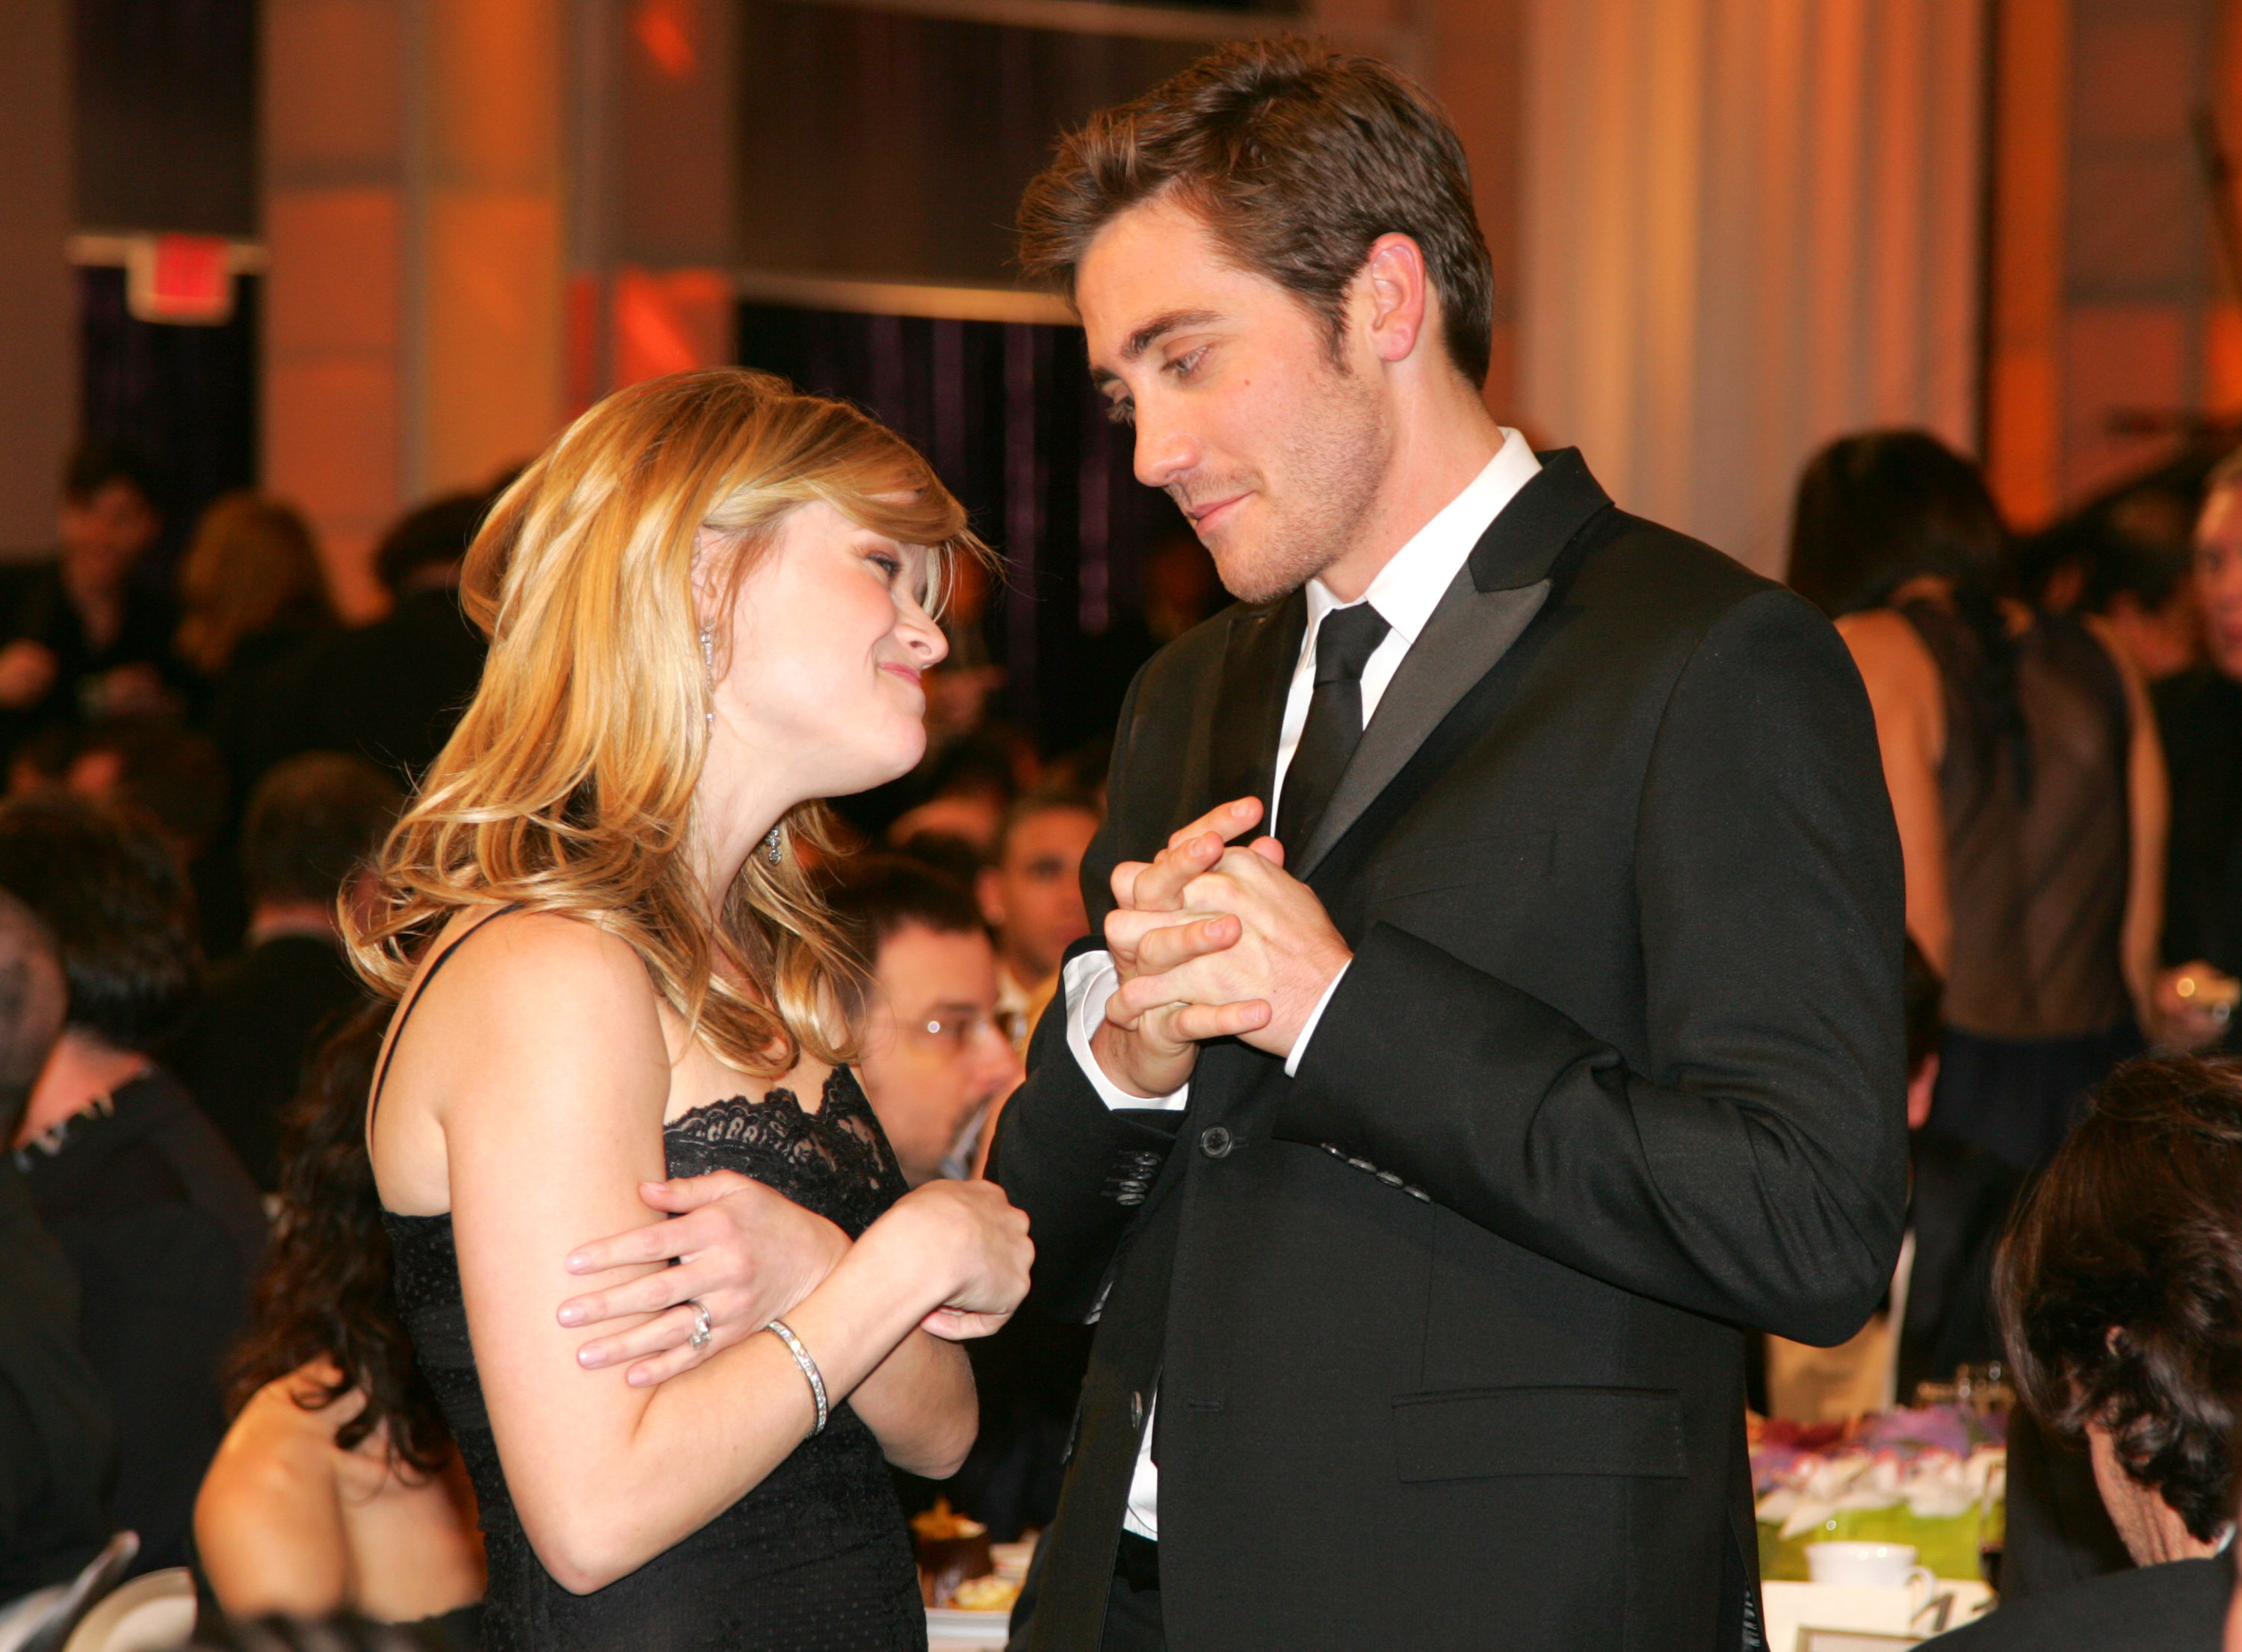 Reese Witherspoon and Jake Gyllenhaal at the 11th Annual Critics' Choice Awards on January 9, 2006. | Source: Getty Image